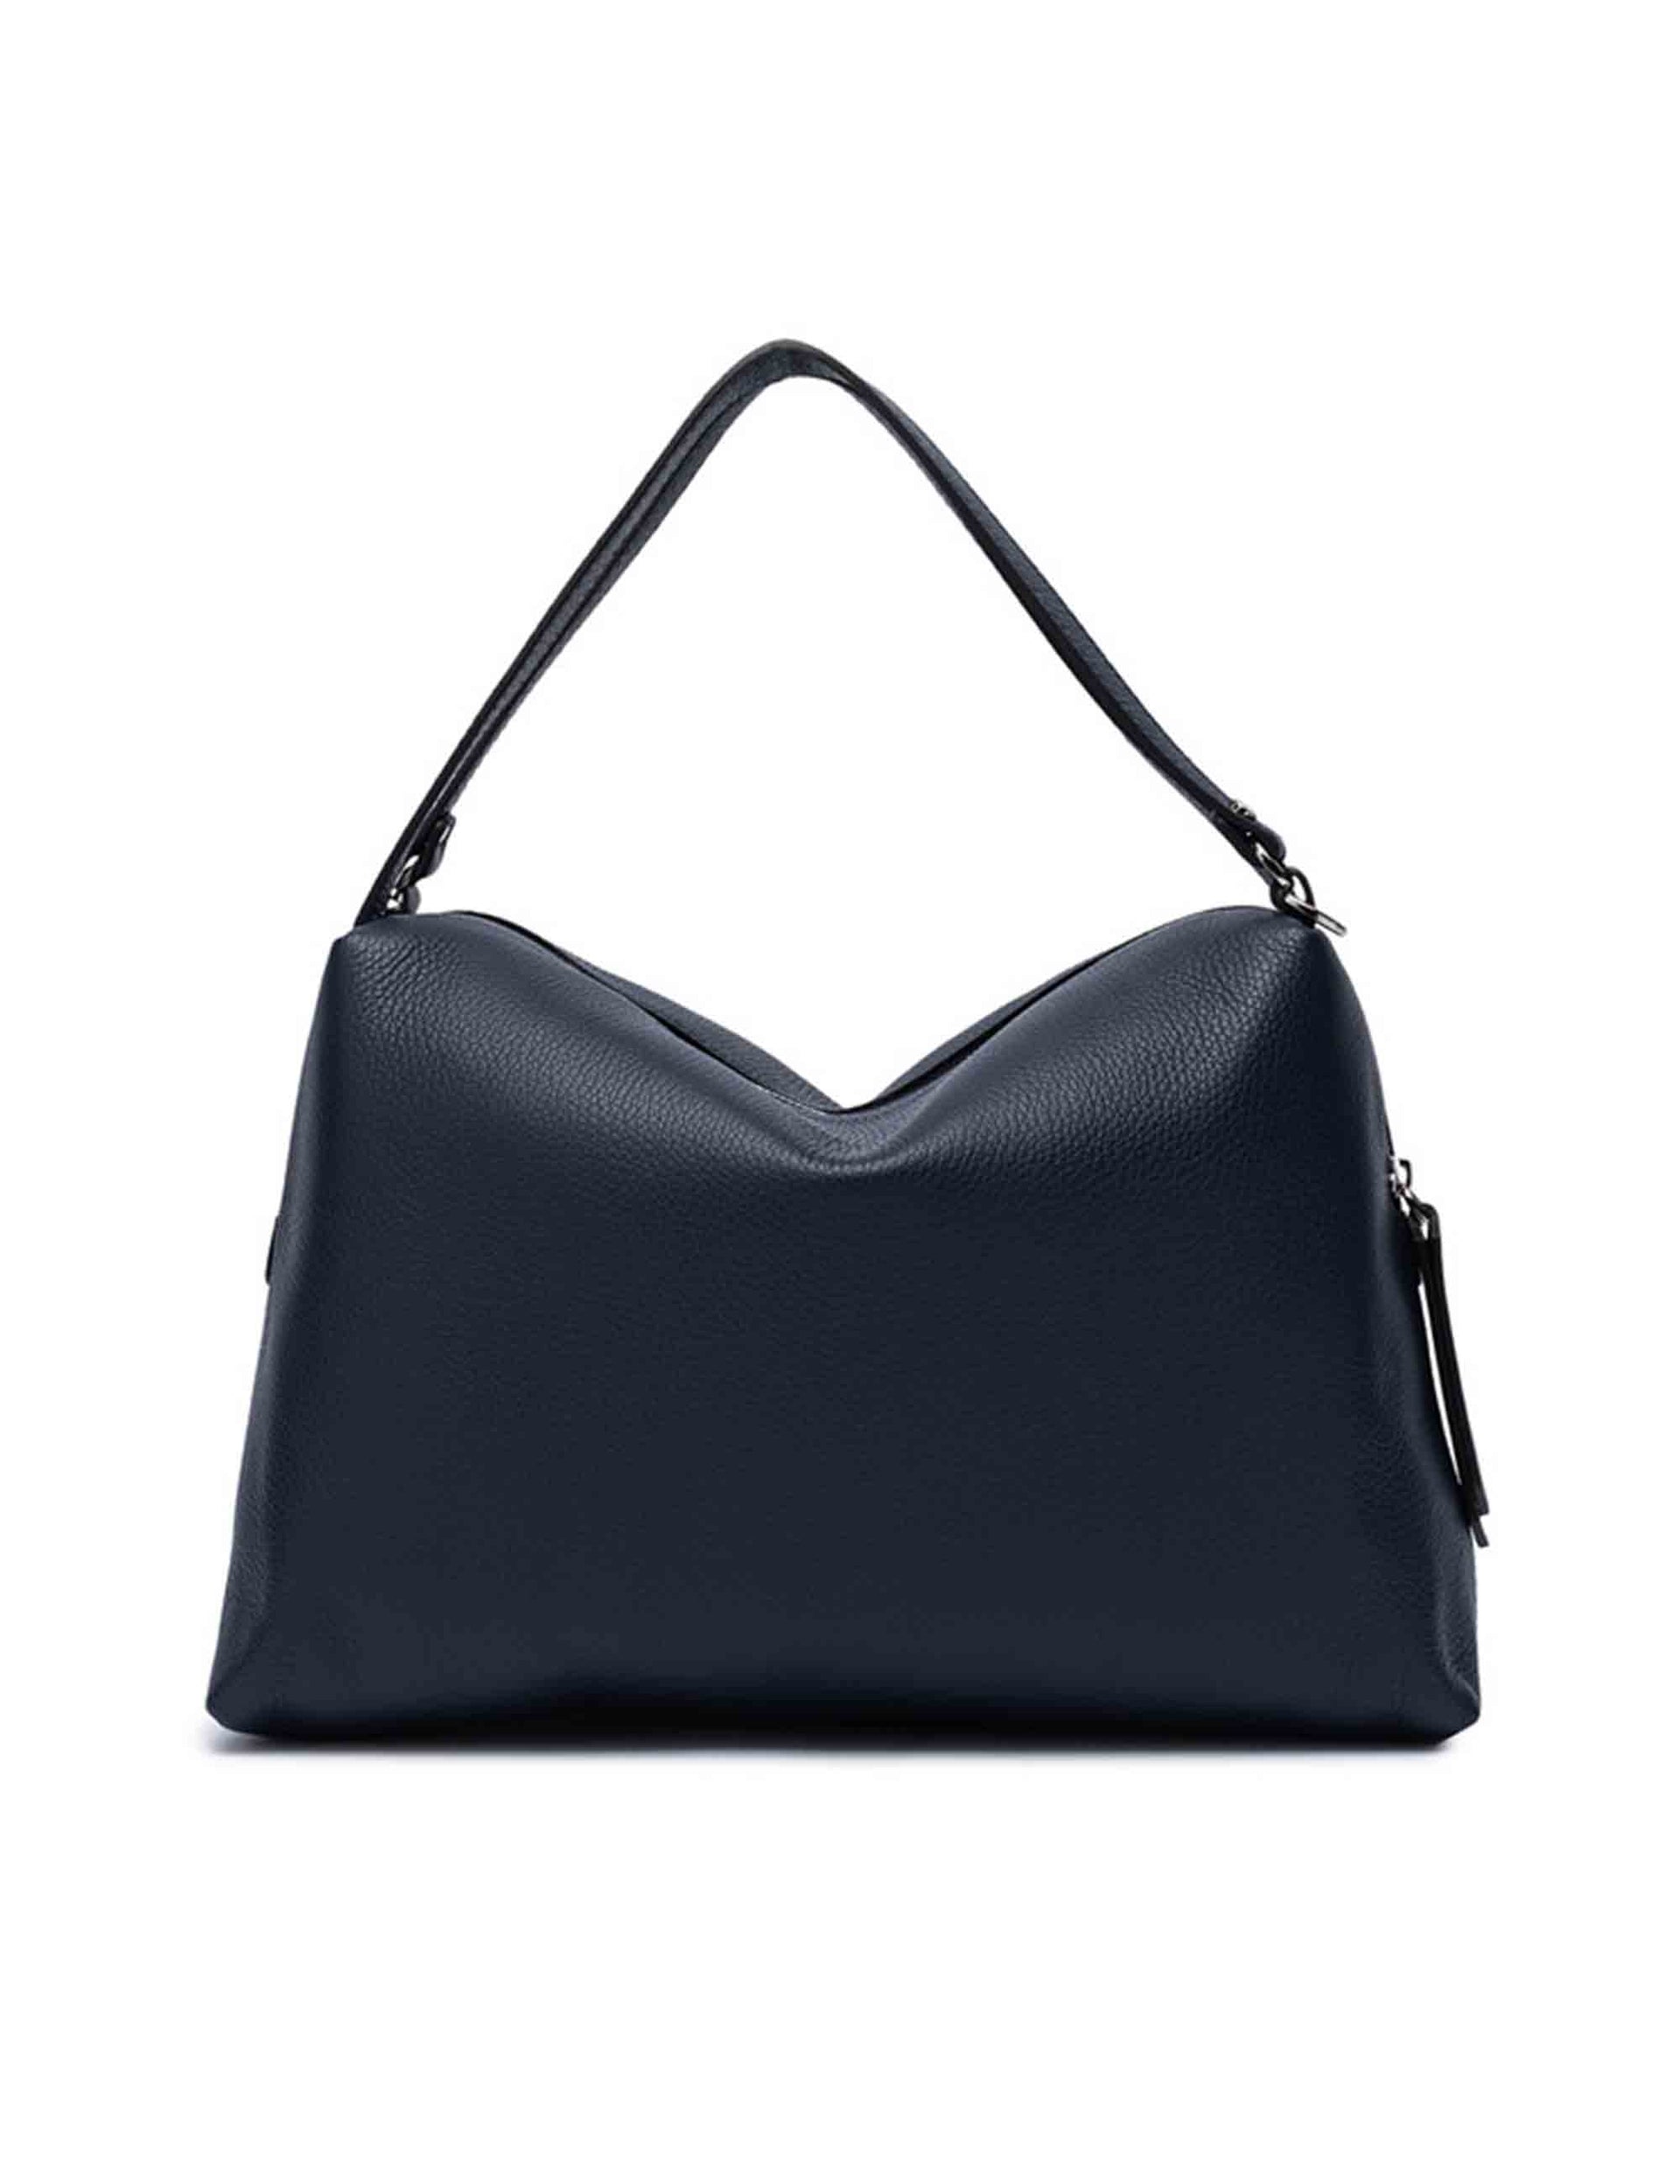 Alifa women's shoulder bags in blue leather with matching handles and shoulder strap